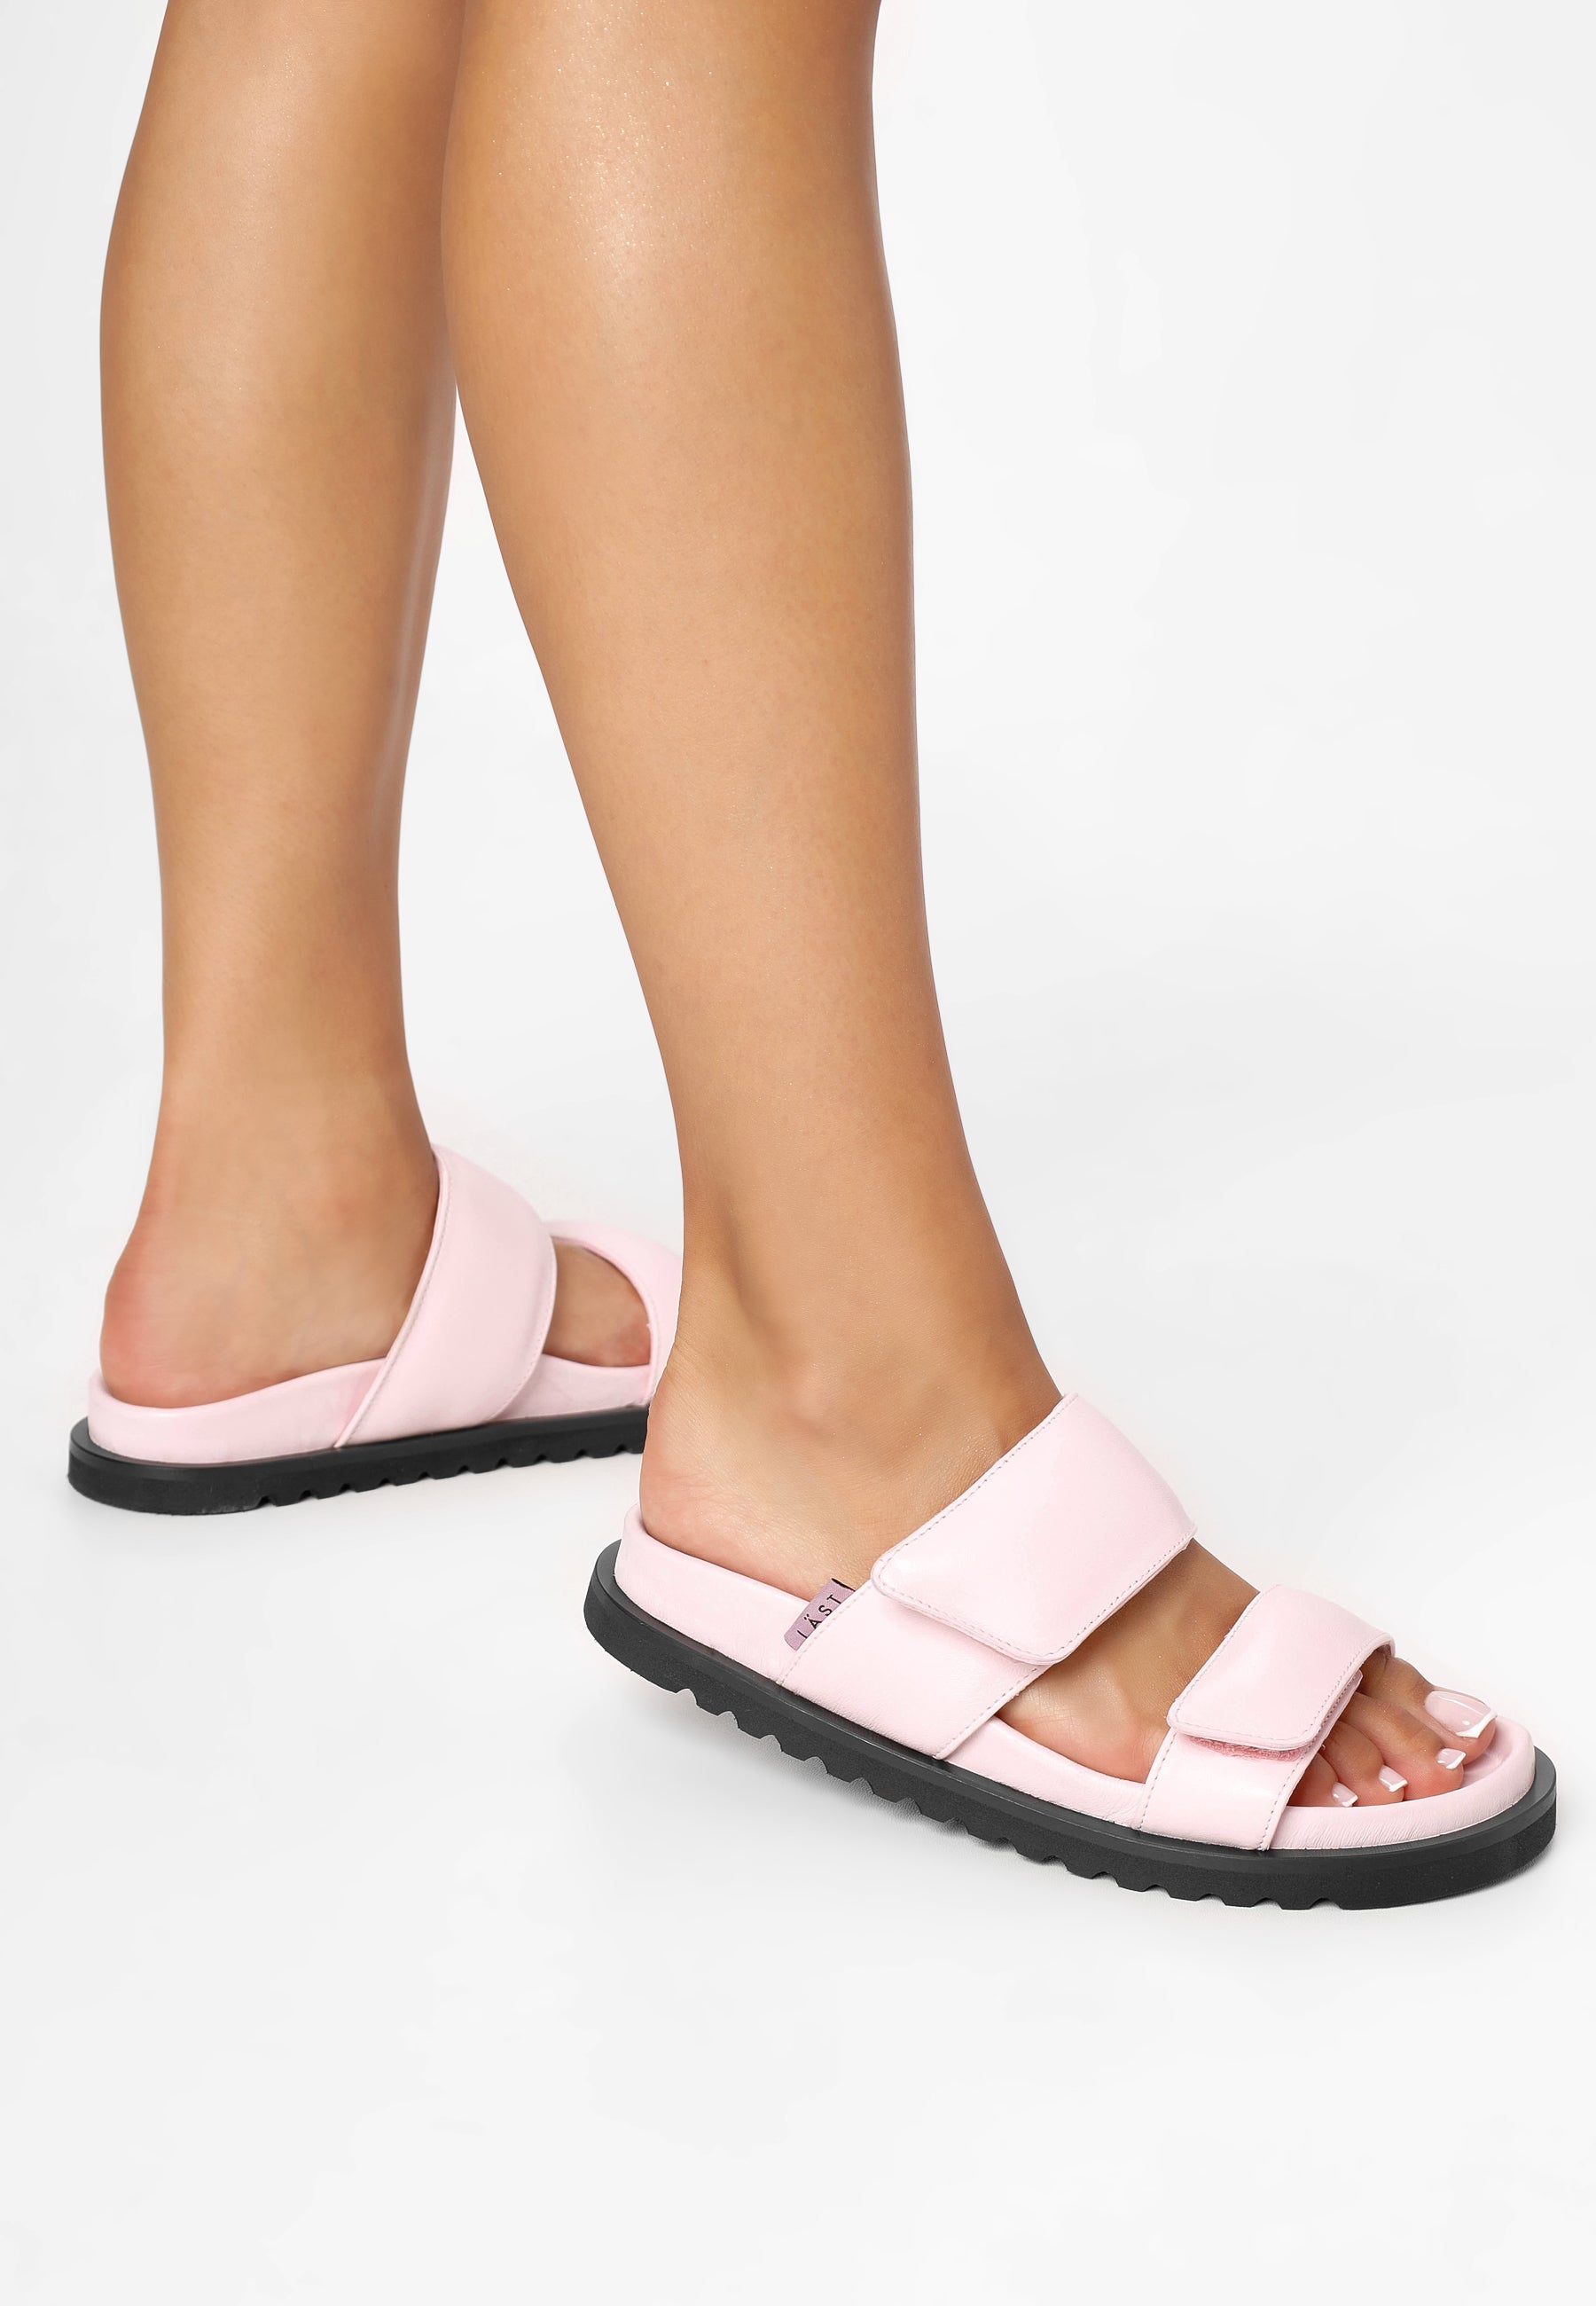 Corine Pink Leather Puffy Sandals LAST1515 - 7